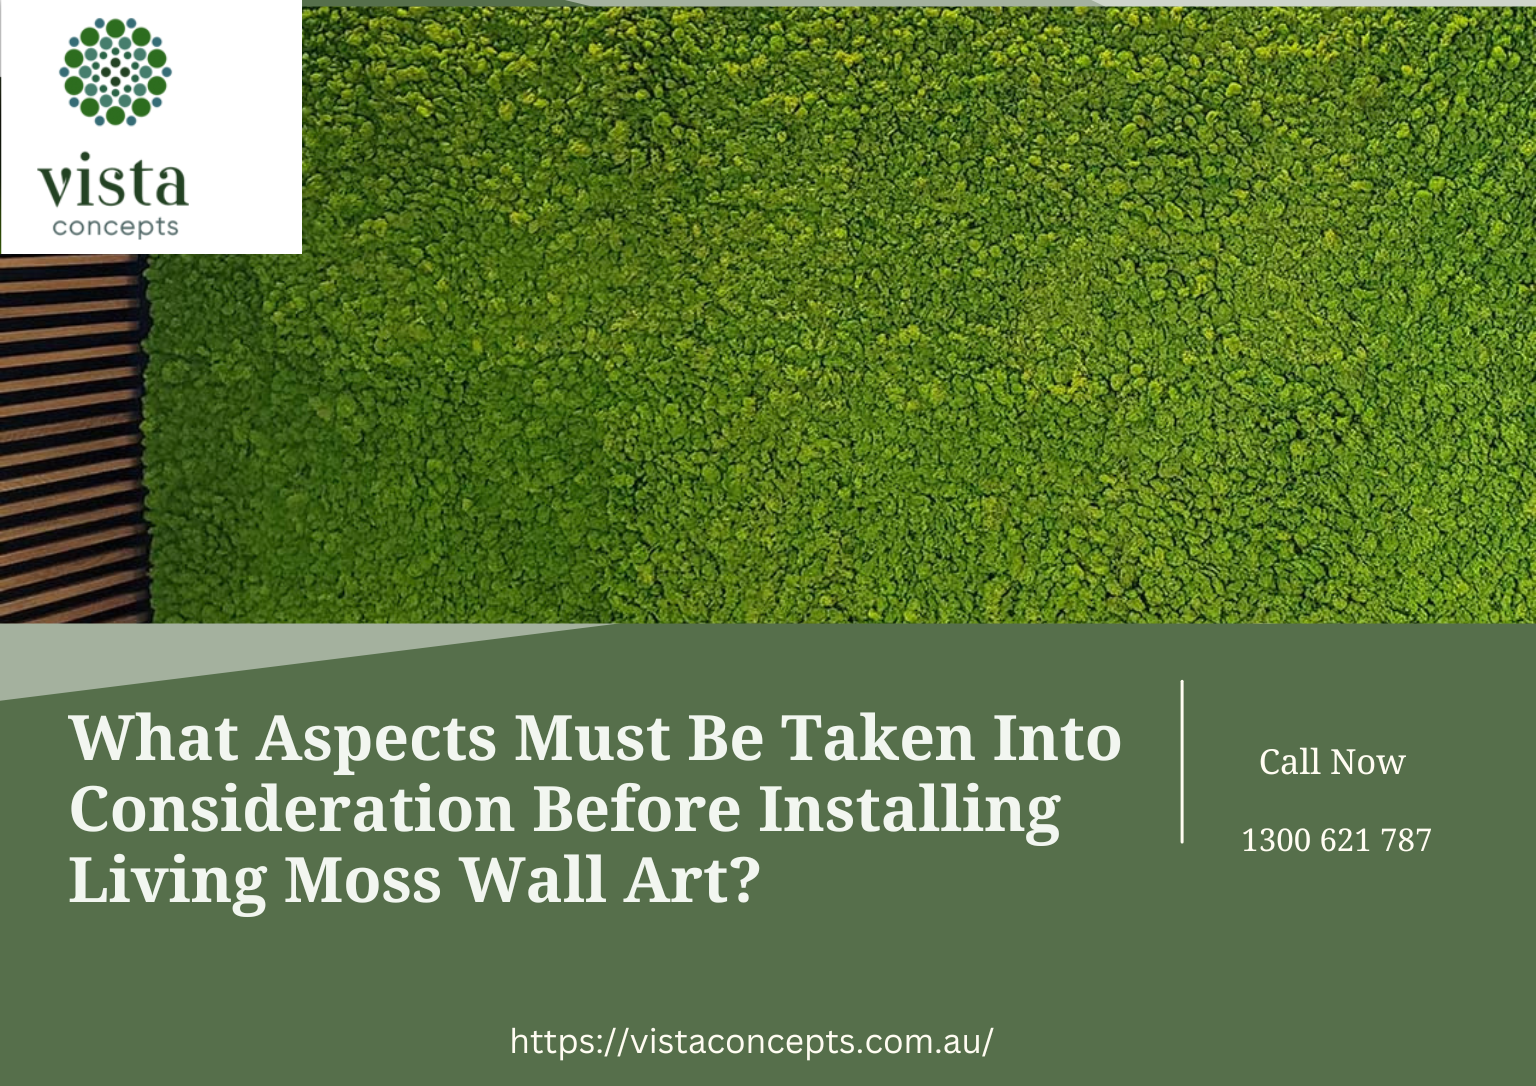 What Aspects Must Be Taken into Consideration Before Installing Living Moss Wall Art? moss wall art